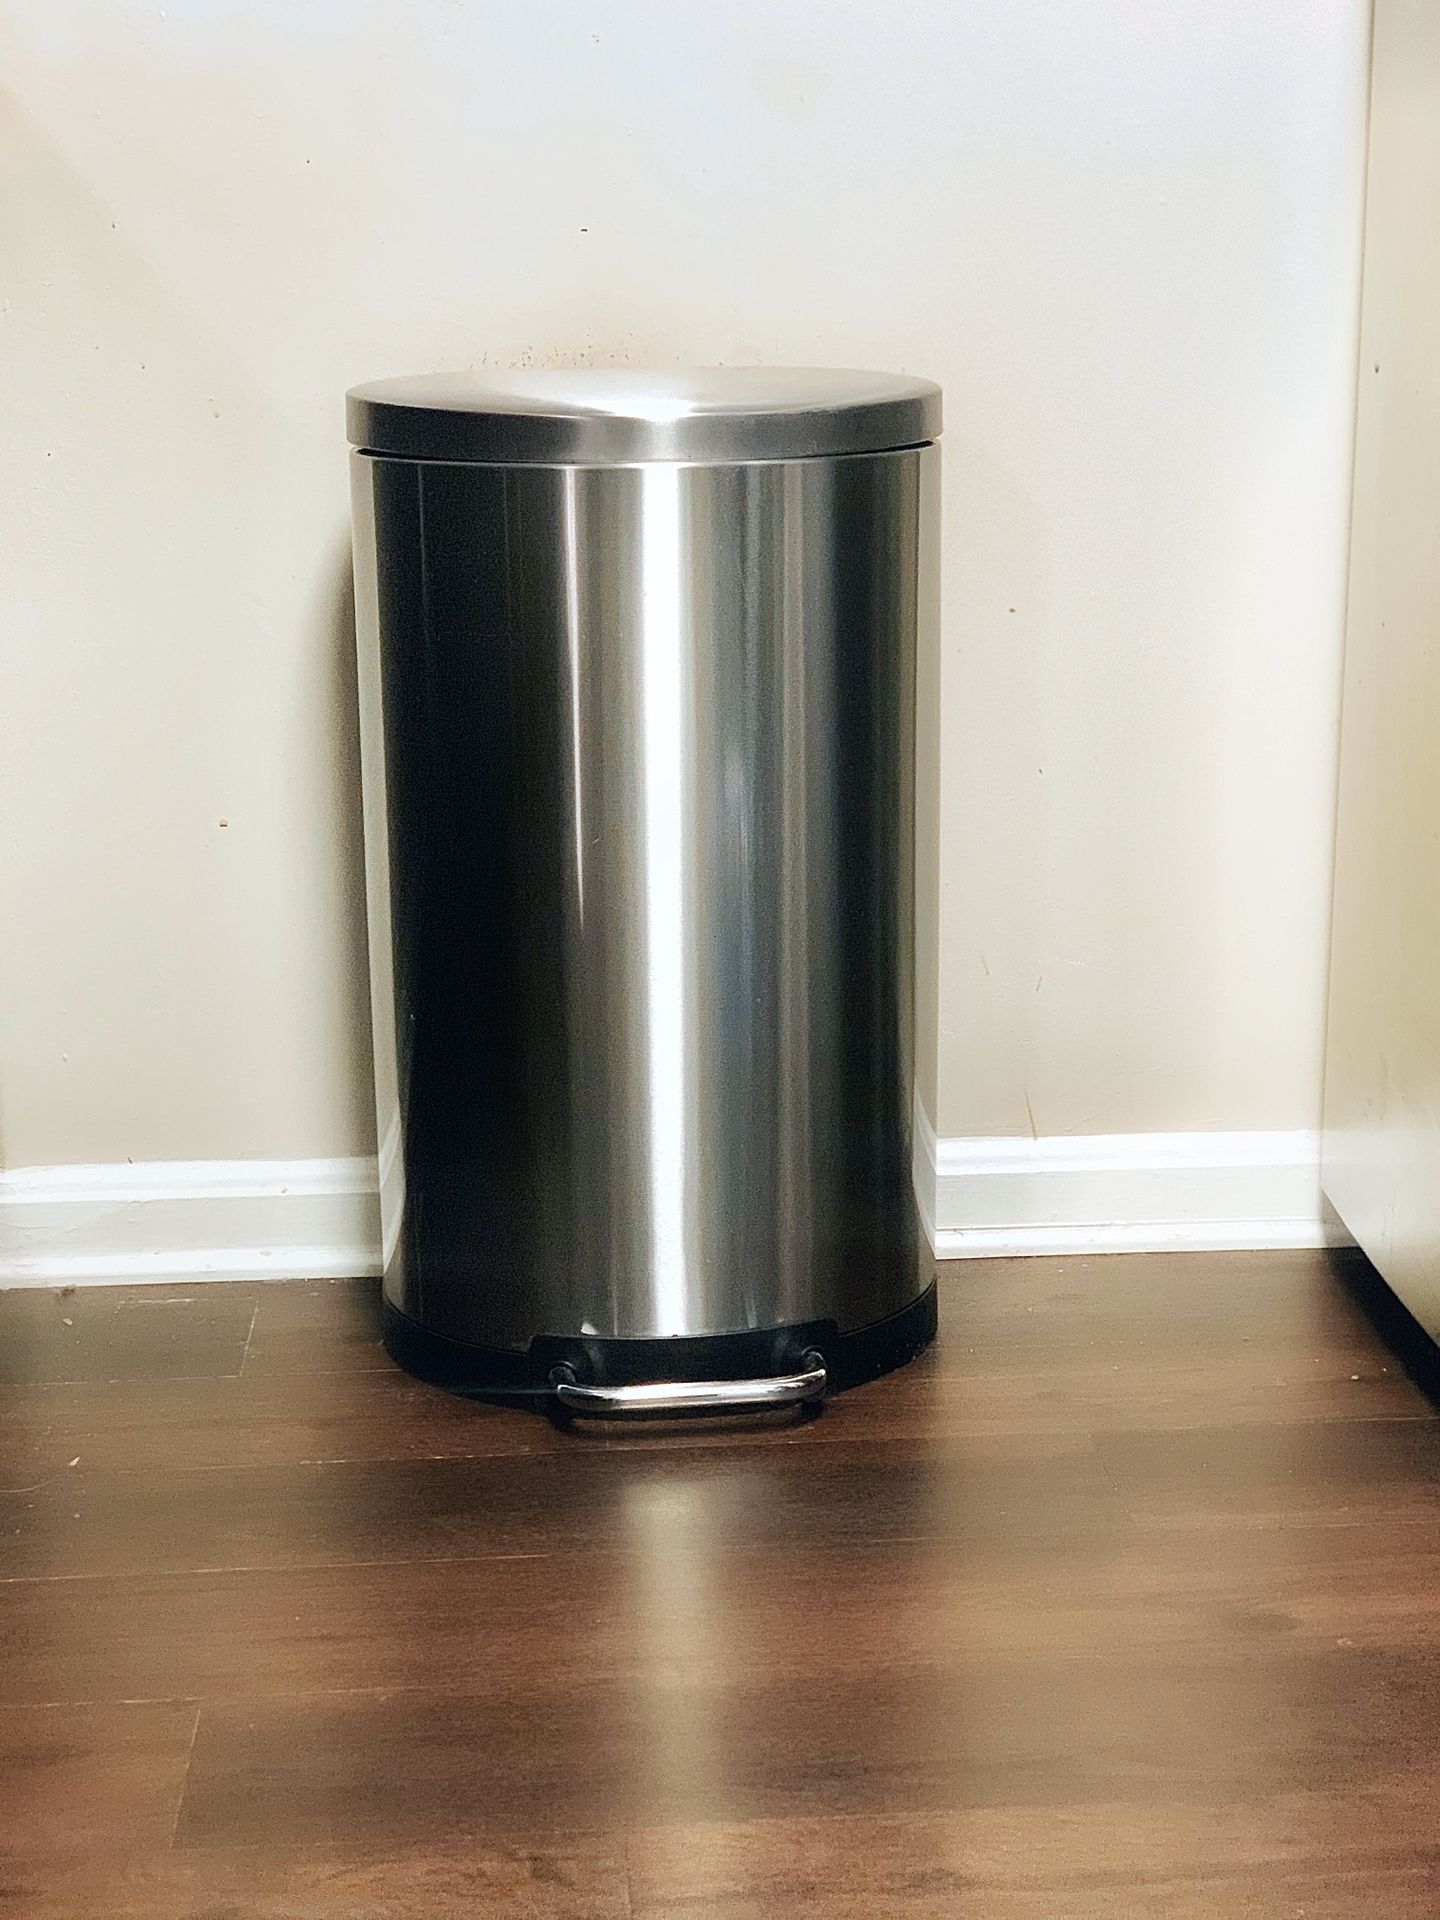 Stainless Steel Kitchen Trash Can with Steel Foot Pedal